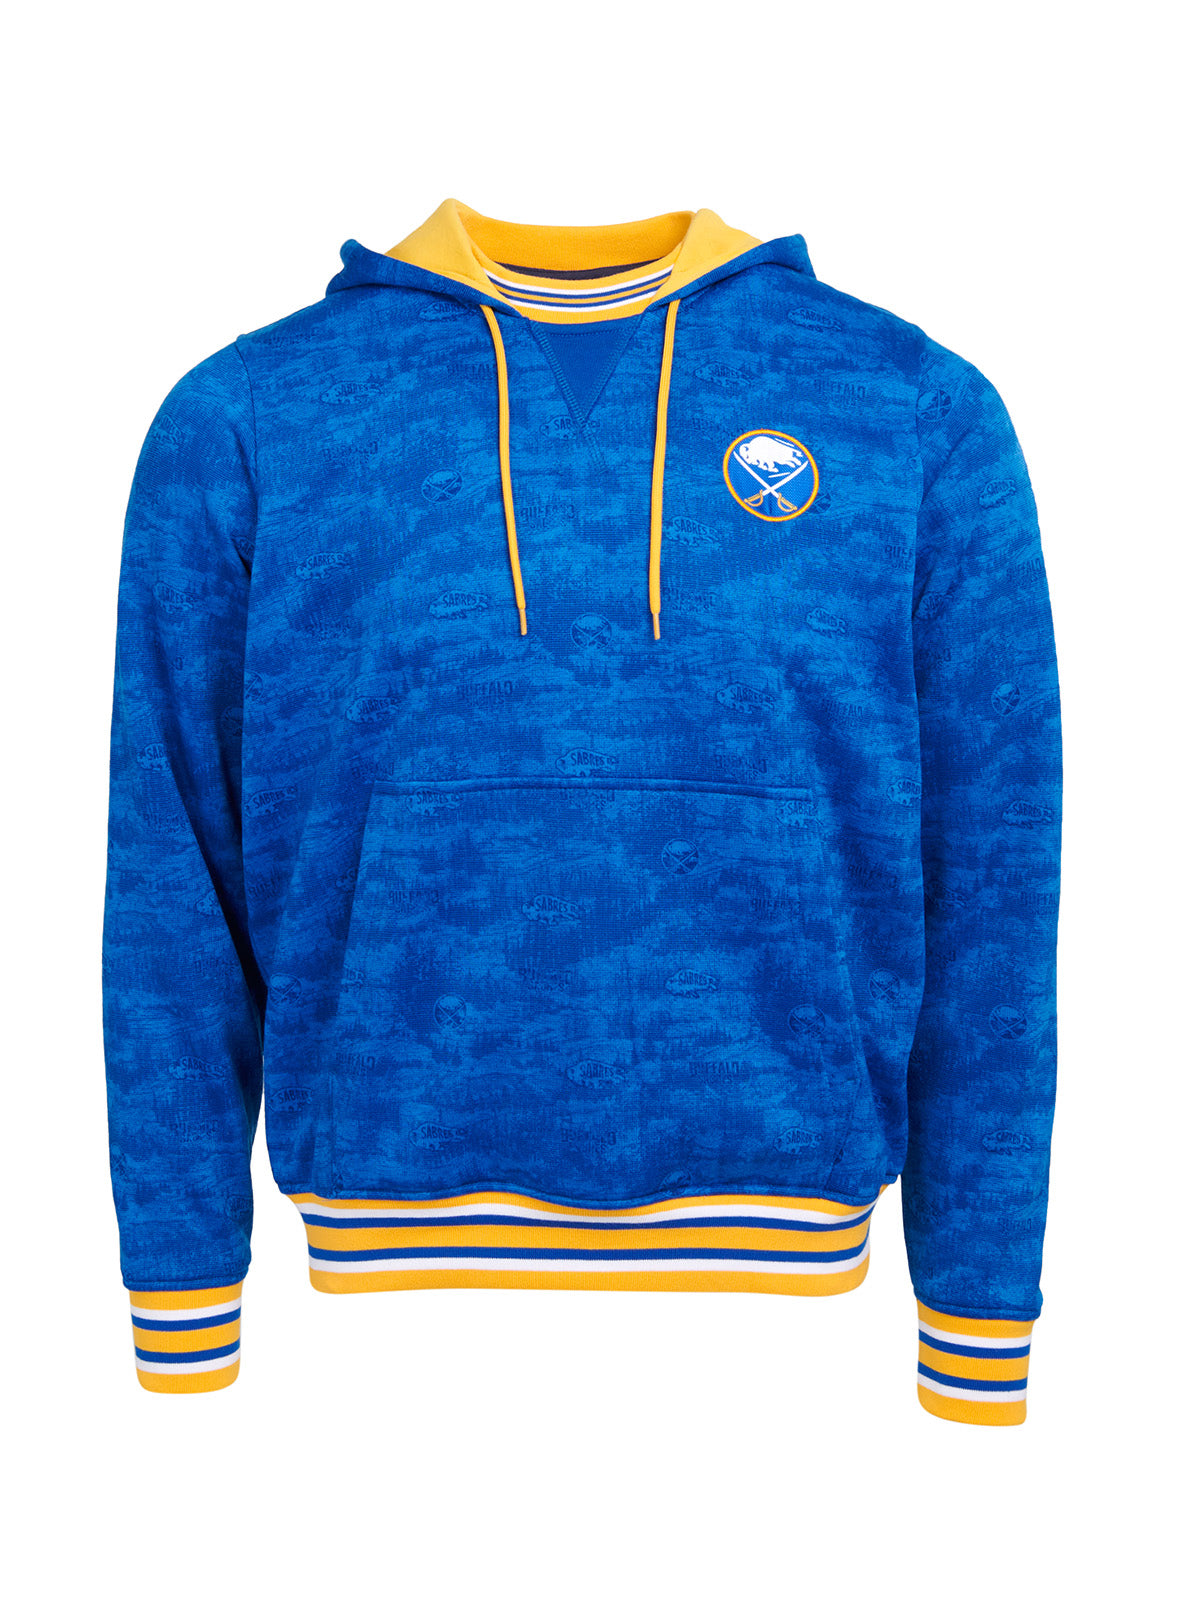 Buffalo Sabres Hoodie - Show your team spirit, with the iconic team logo patch on the front left chest, and proudly display your Buffalo Sabres support in their team colors with this NHL hockey hoodie.